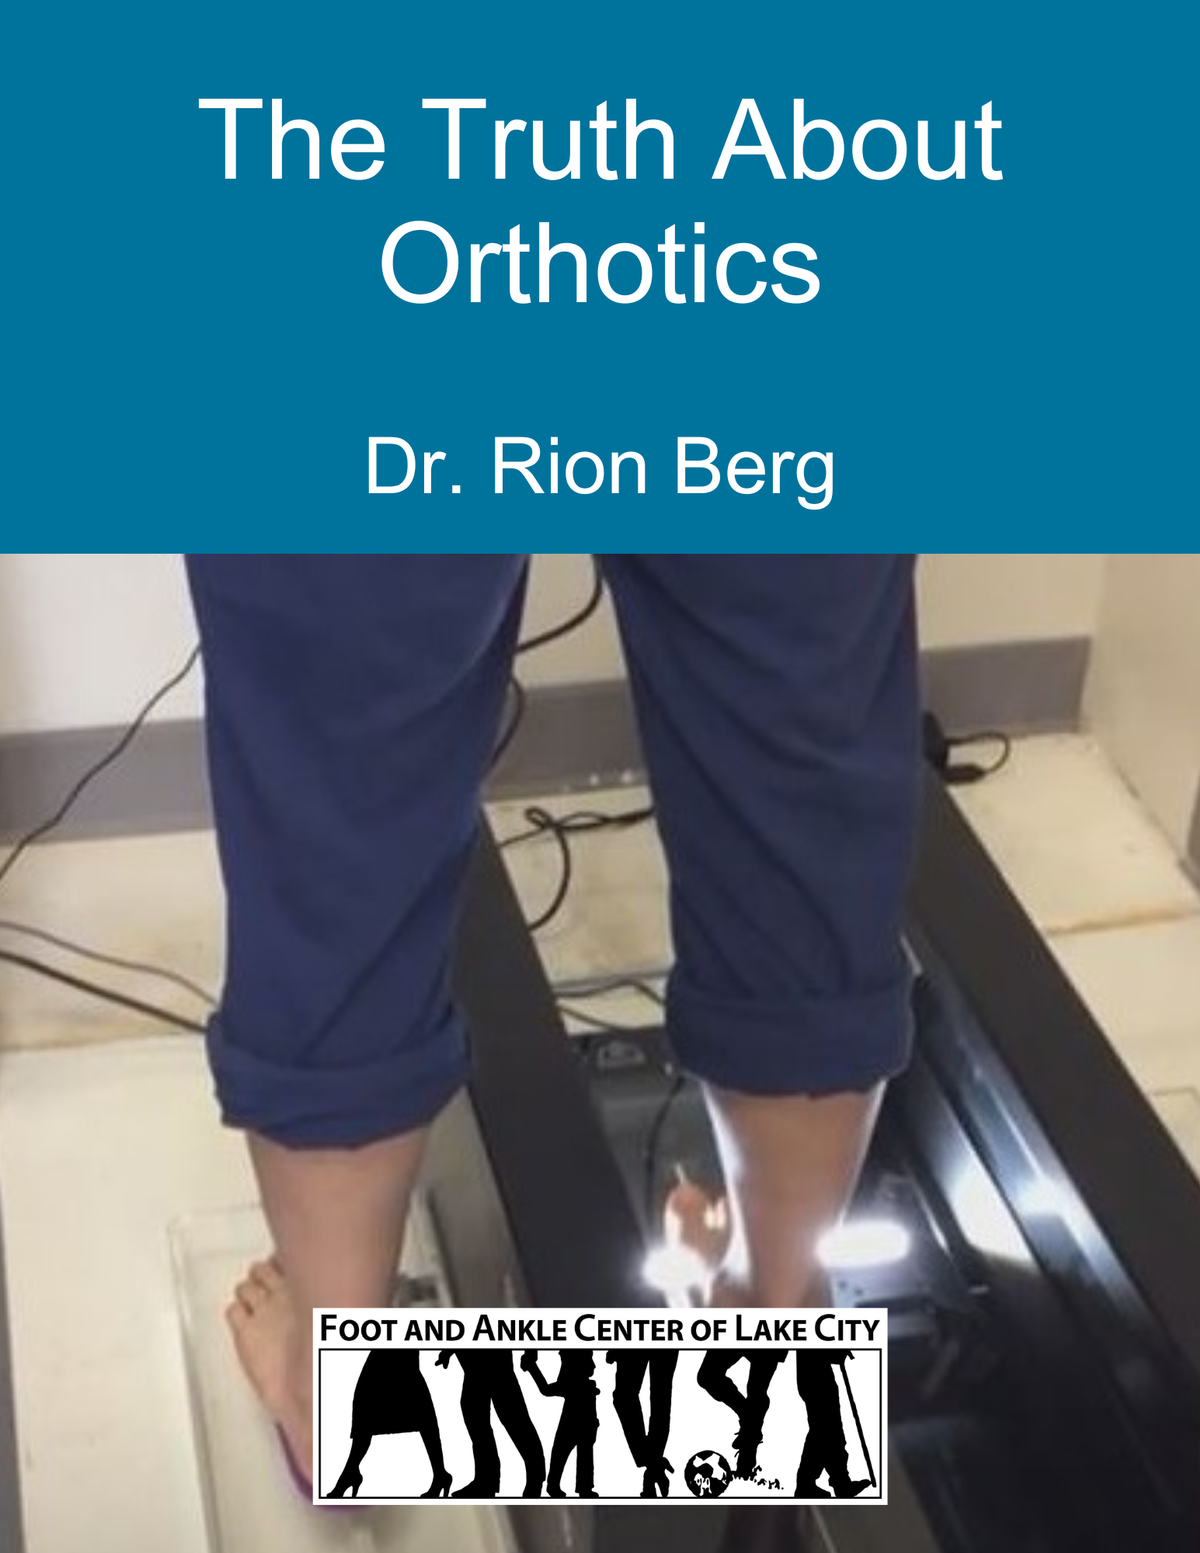 The Truth About Orthotics